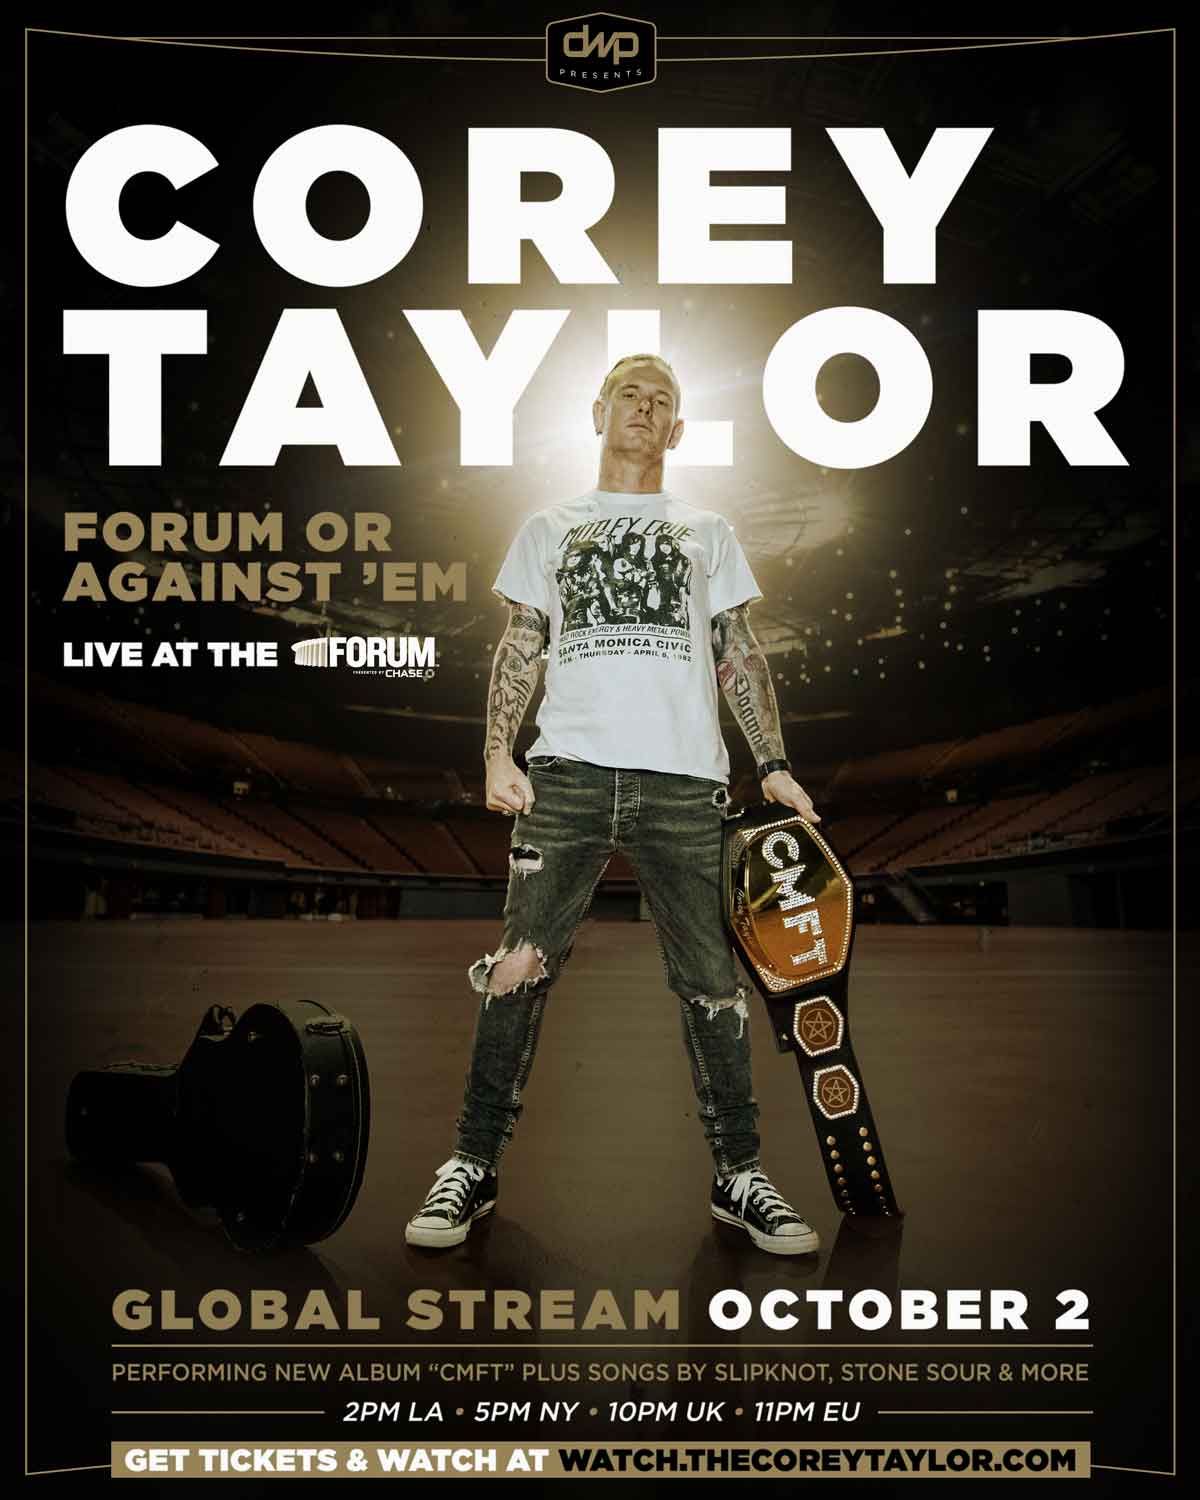 Corey Taylor Drops New Trailer For 'Forum Or Against 'Em' Global Live Stream Event